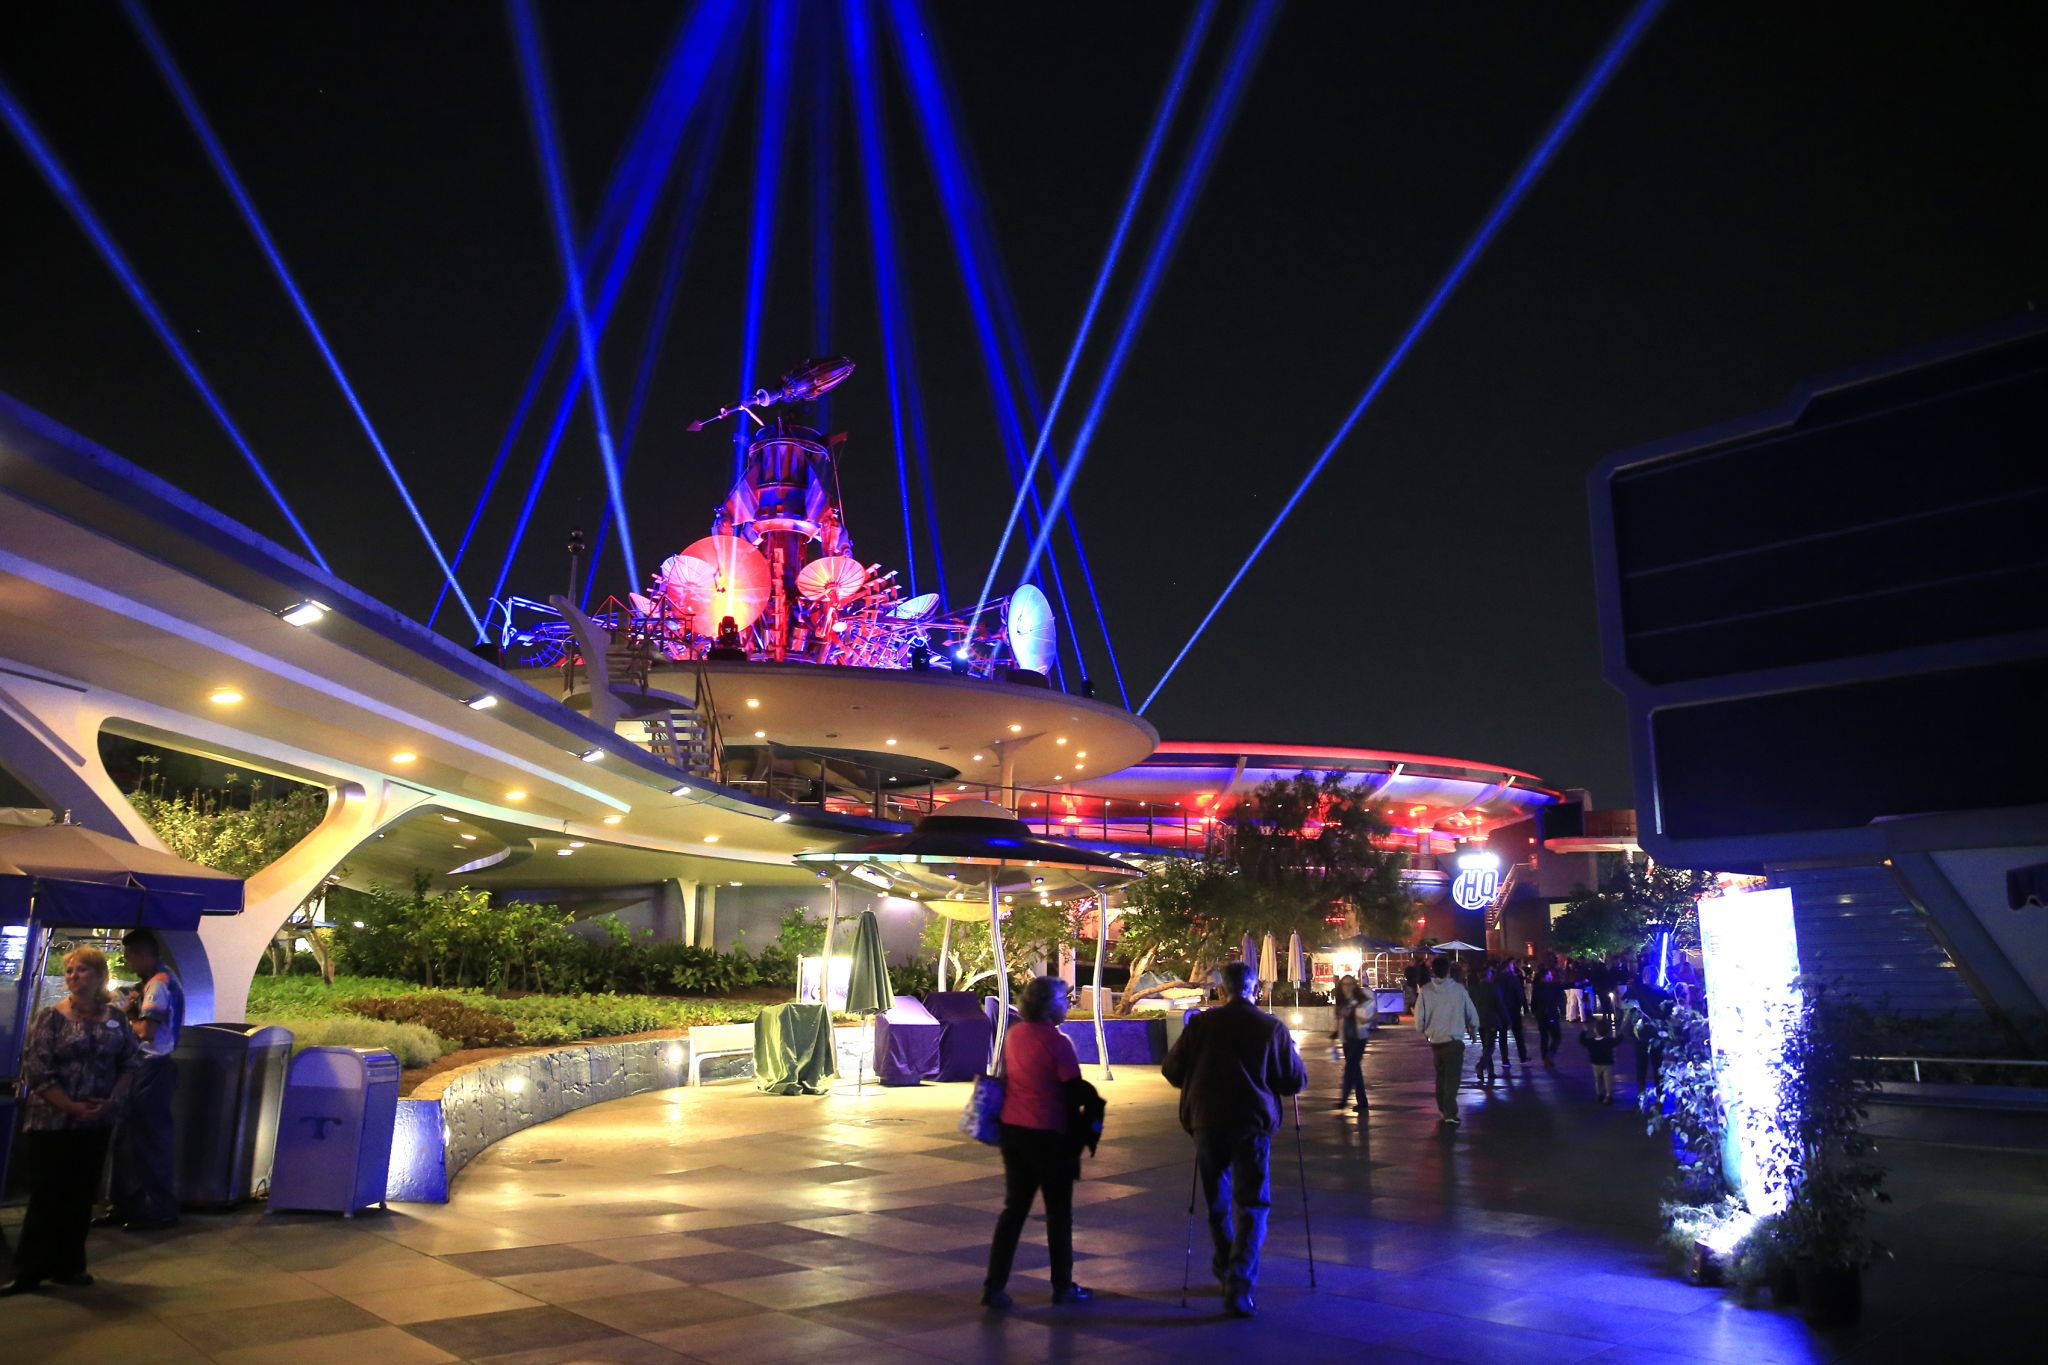 Disneyland's Tomorrowland was terribly conceived from the start. There